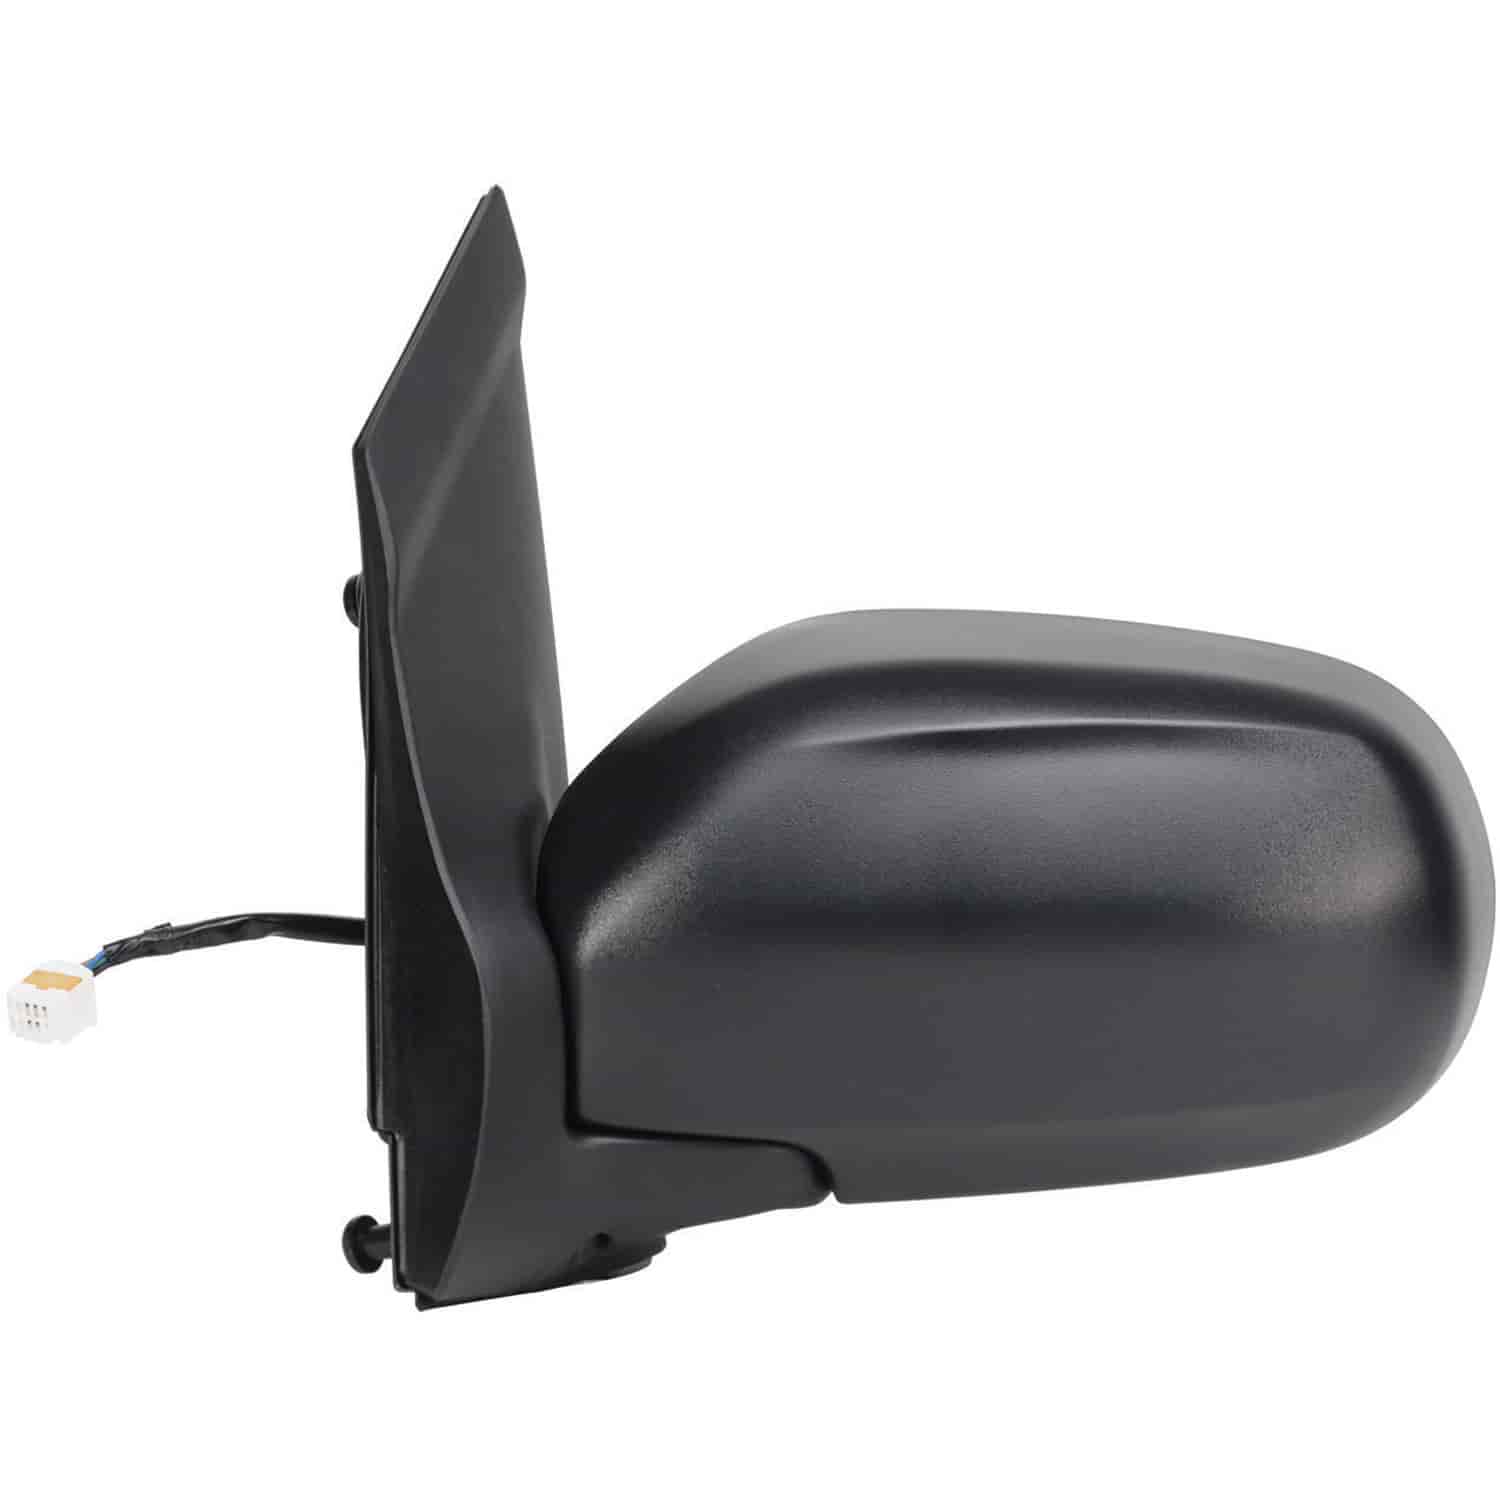 OEM Style Replacement mirror for 00-06 Mazda MPV driver side mirror tested to fit and function like